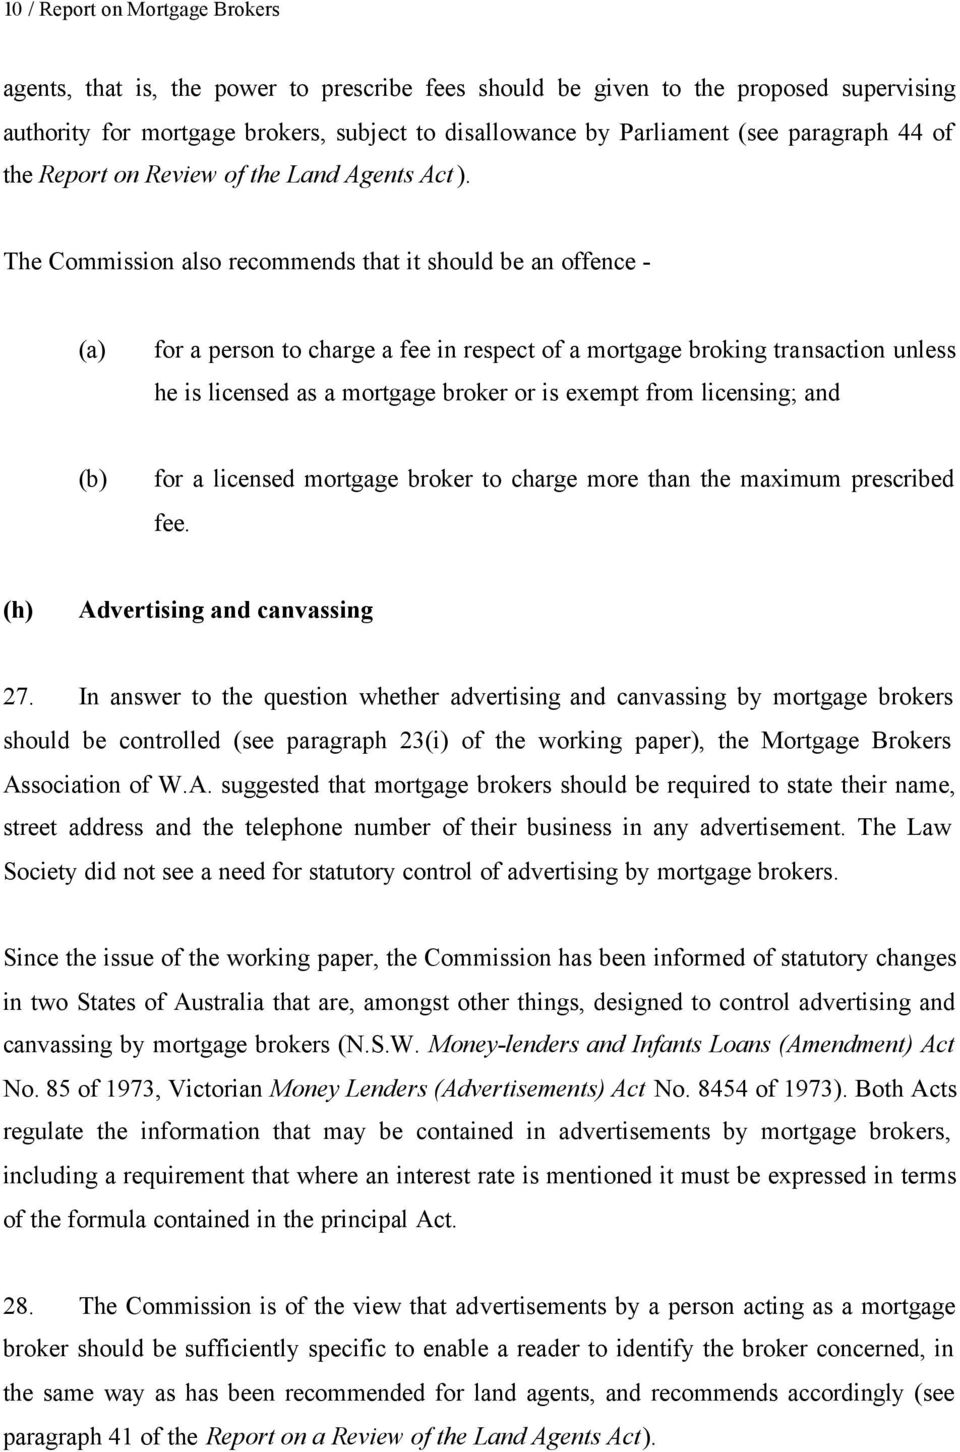 The Commission also recommends that it should be an offence - (a) for a person to charge a fee in respect of a mortgage broking transaction unless he is licensed as a mortgage broker or is exempt